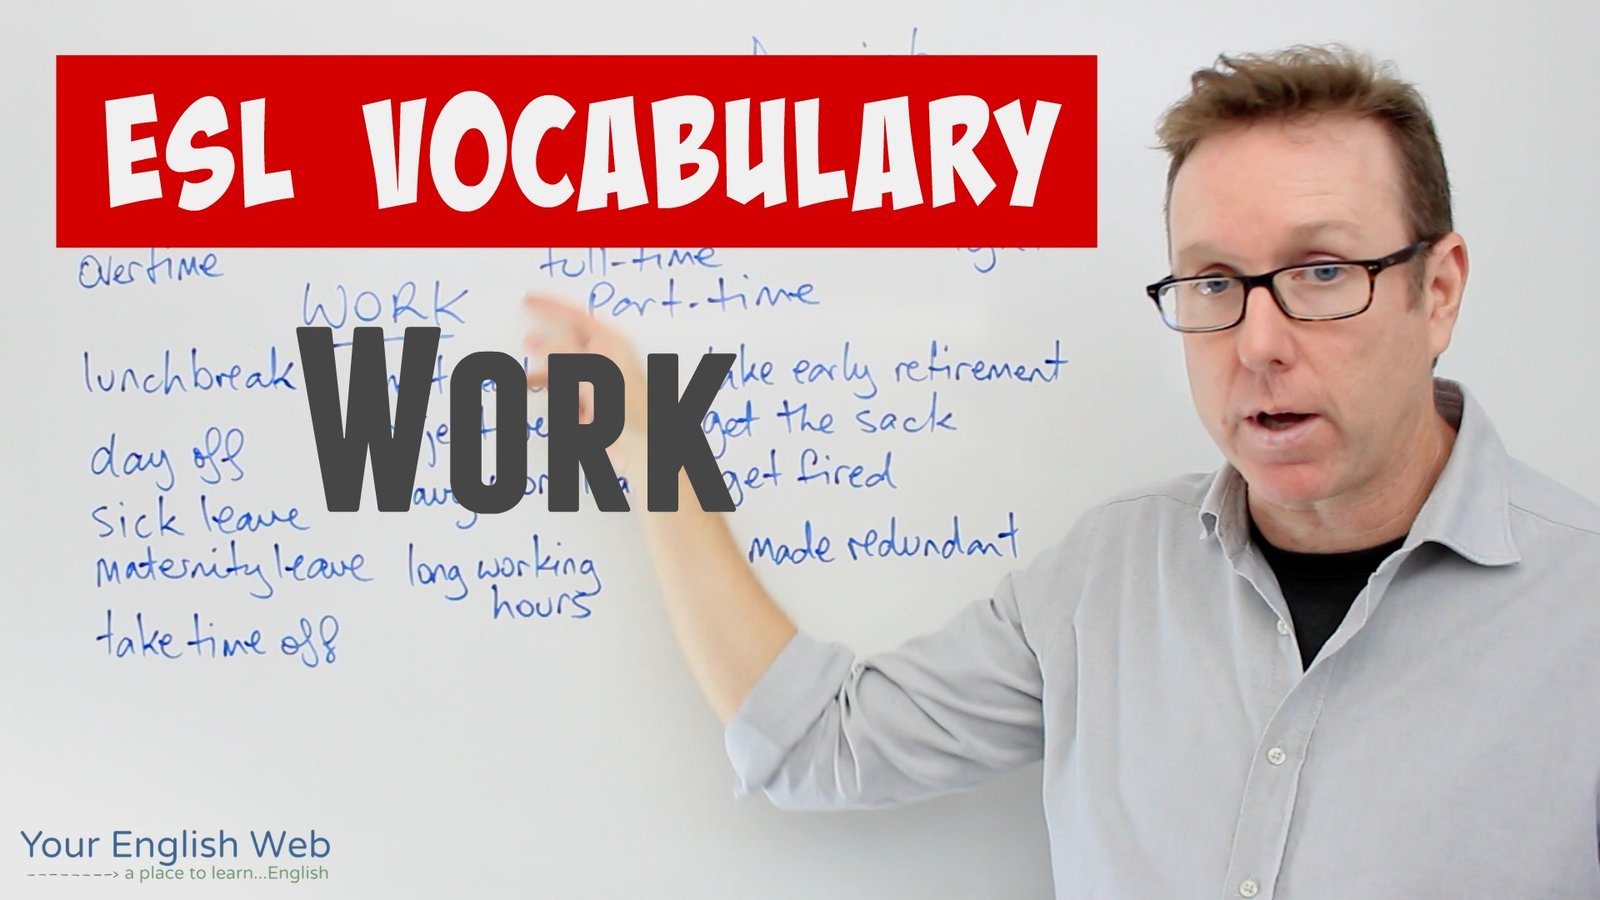 english-vocabulary-lesson-about-work-your-english-web